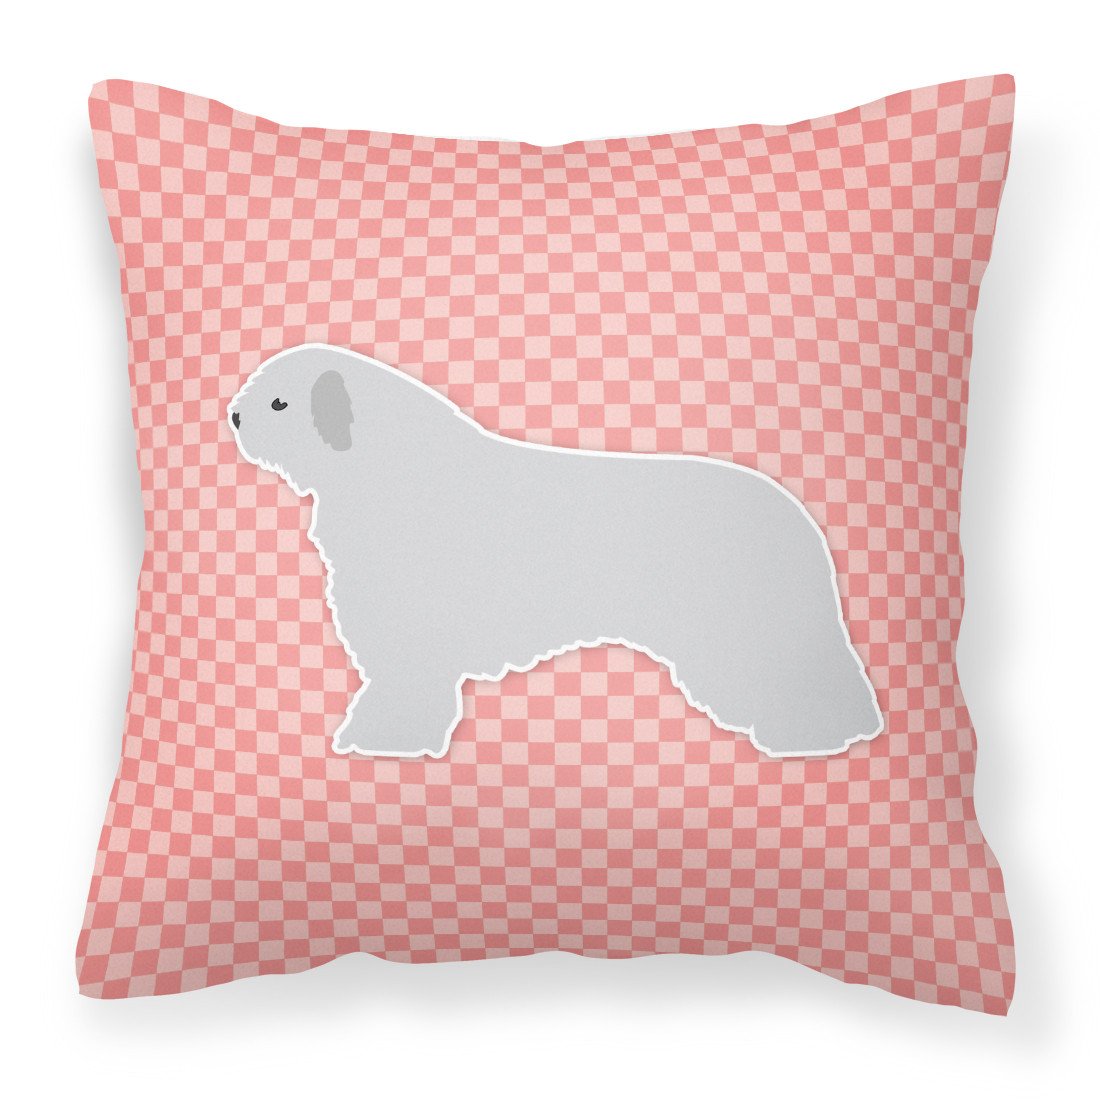 Spanish Water Dog Checkerboard Pink Fabric Decorative Pillow BB3615PW1818 by Caroline's Treasures